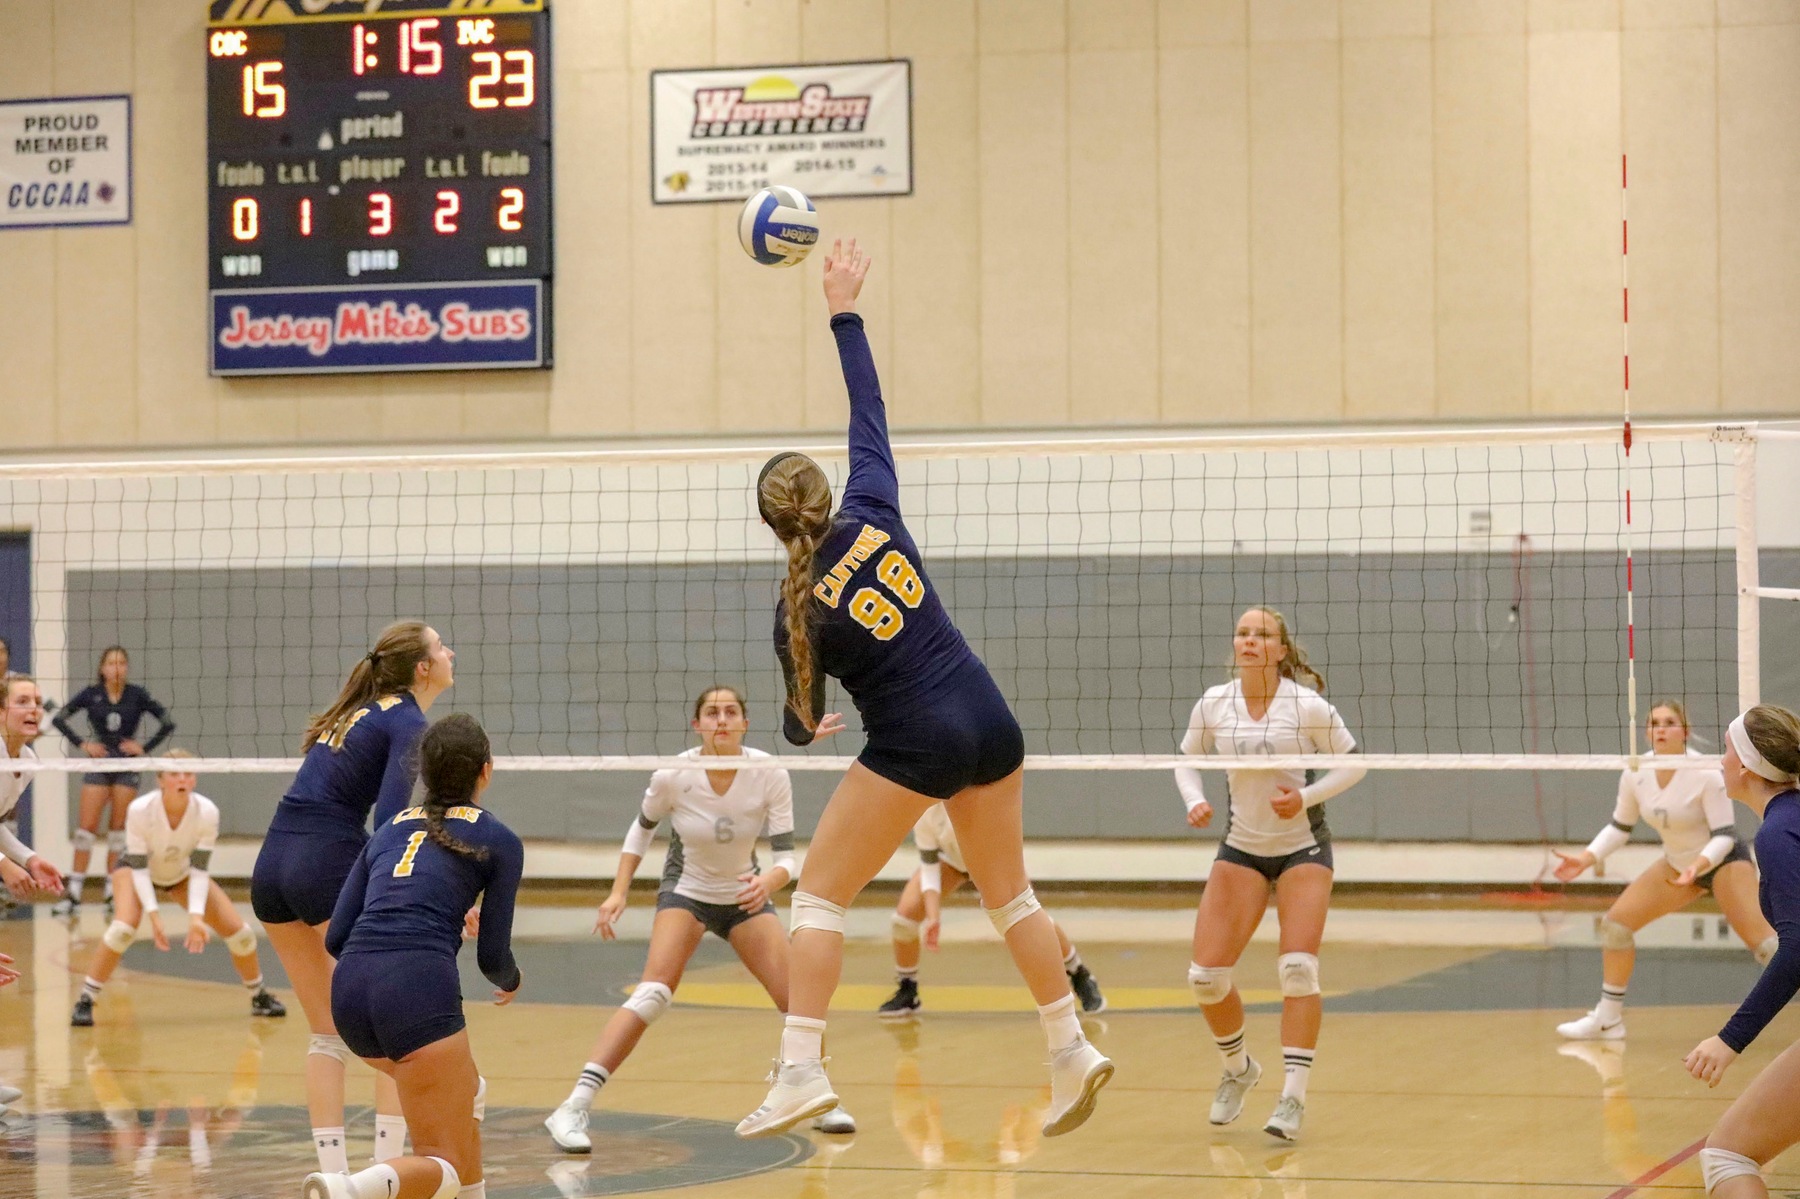 Canyons Suffers First Loss to Irvine Valley